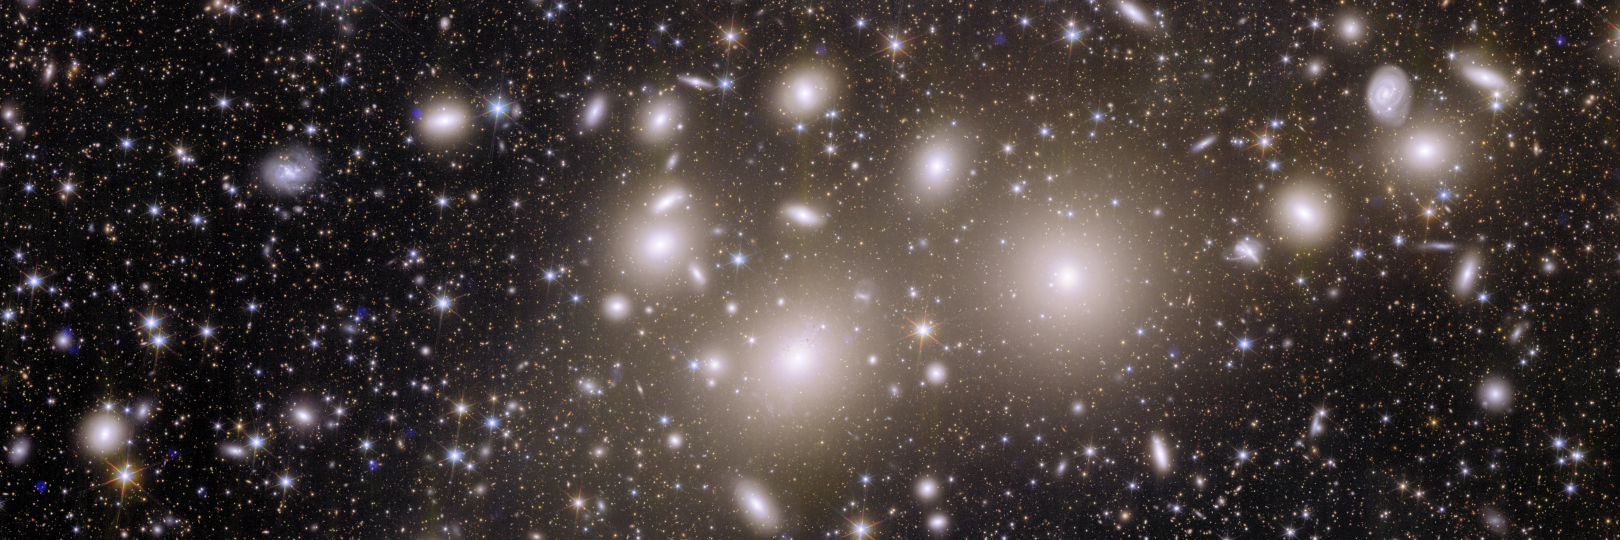 Euclid Image of Perseus Cluster